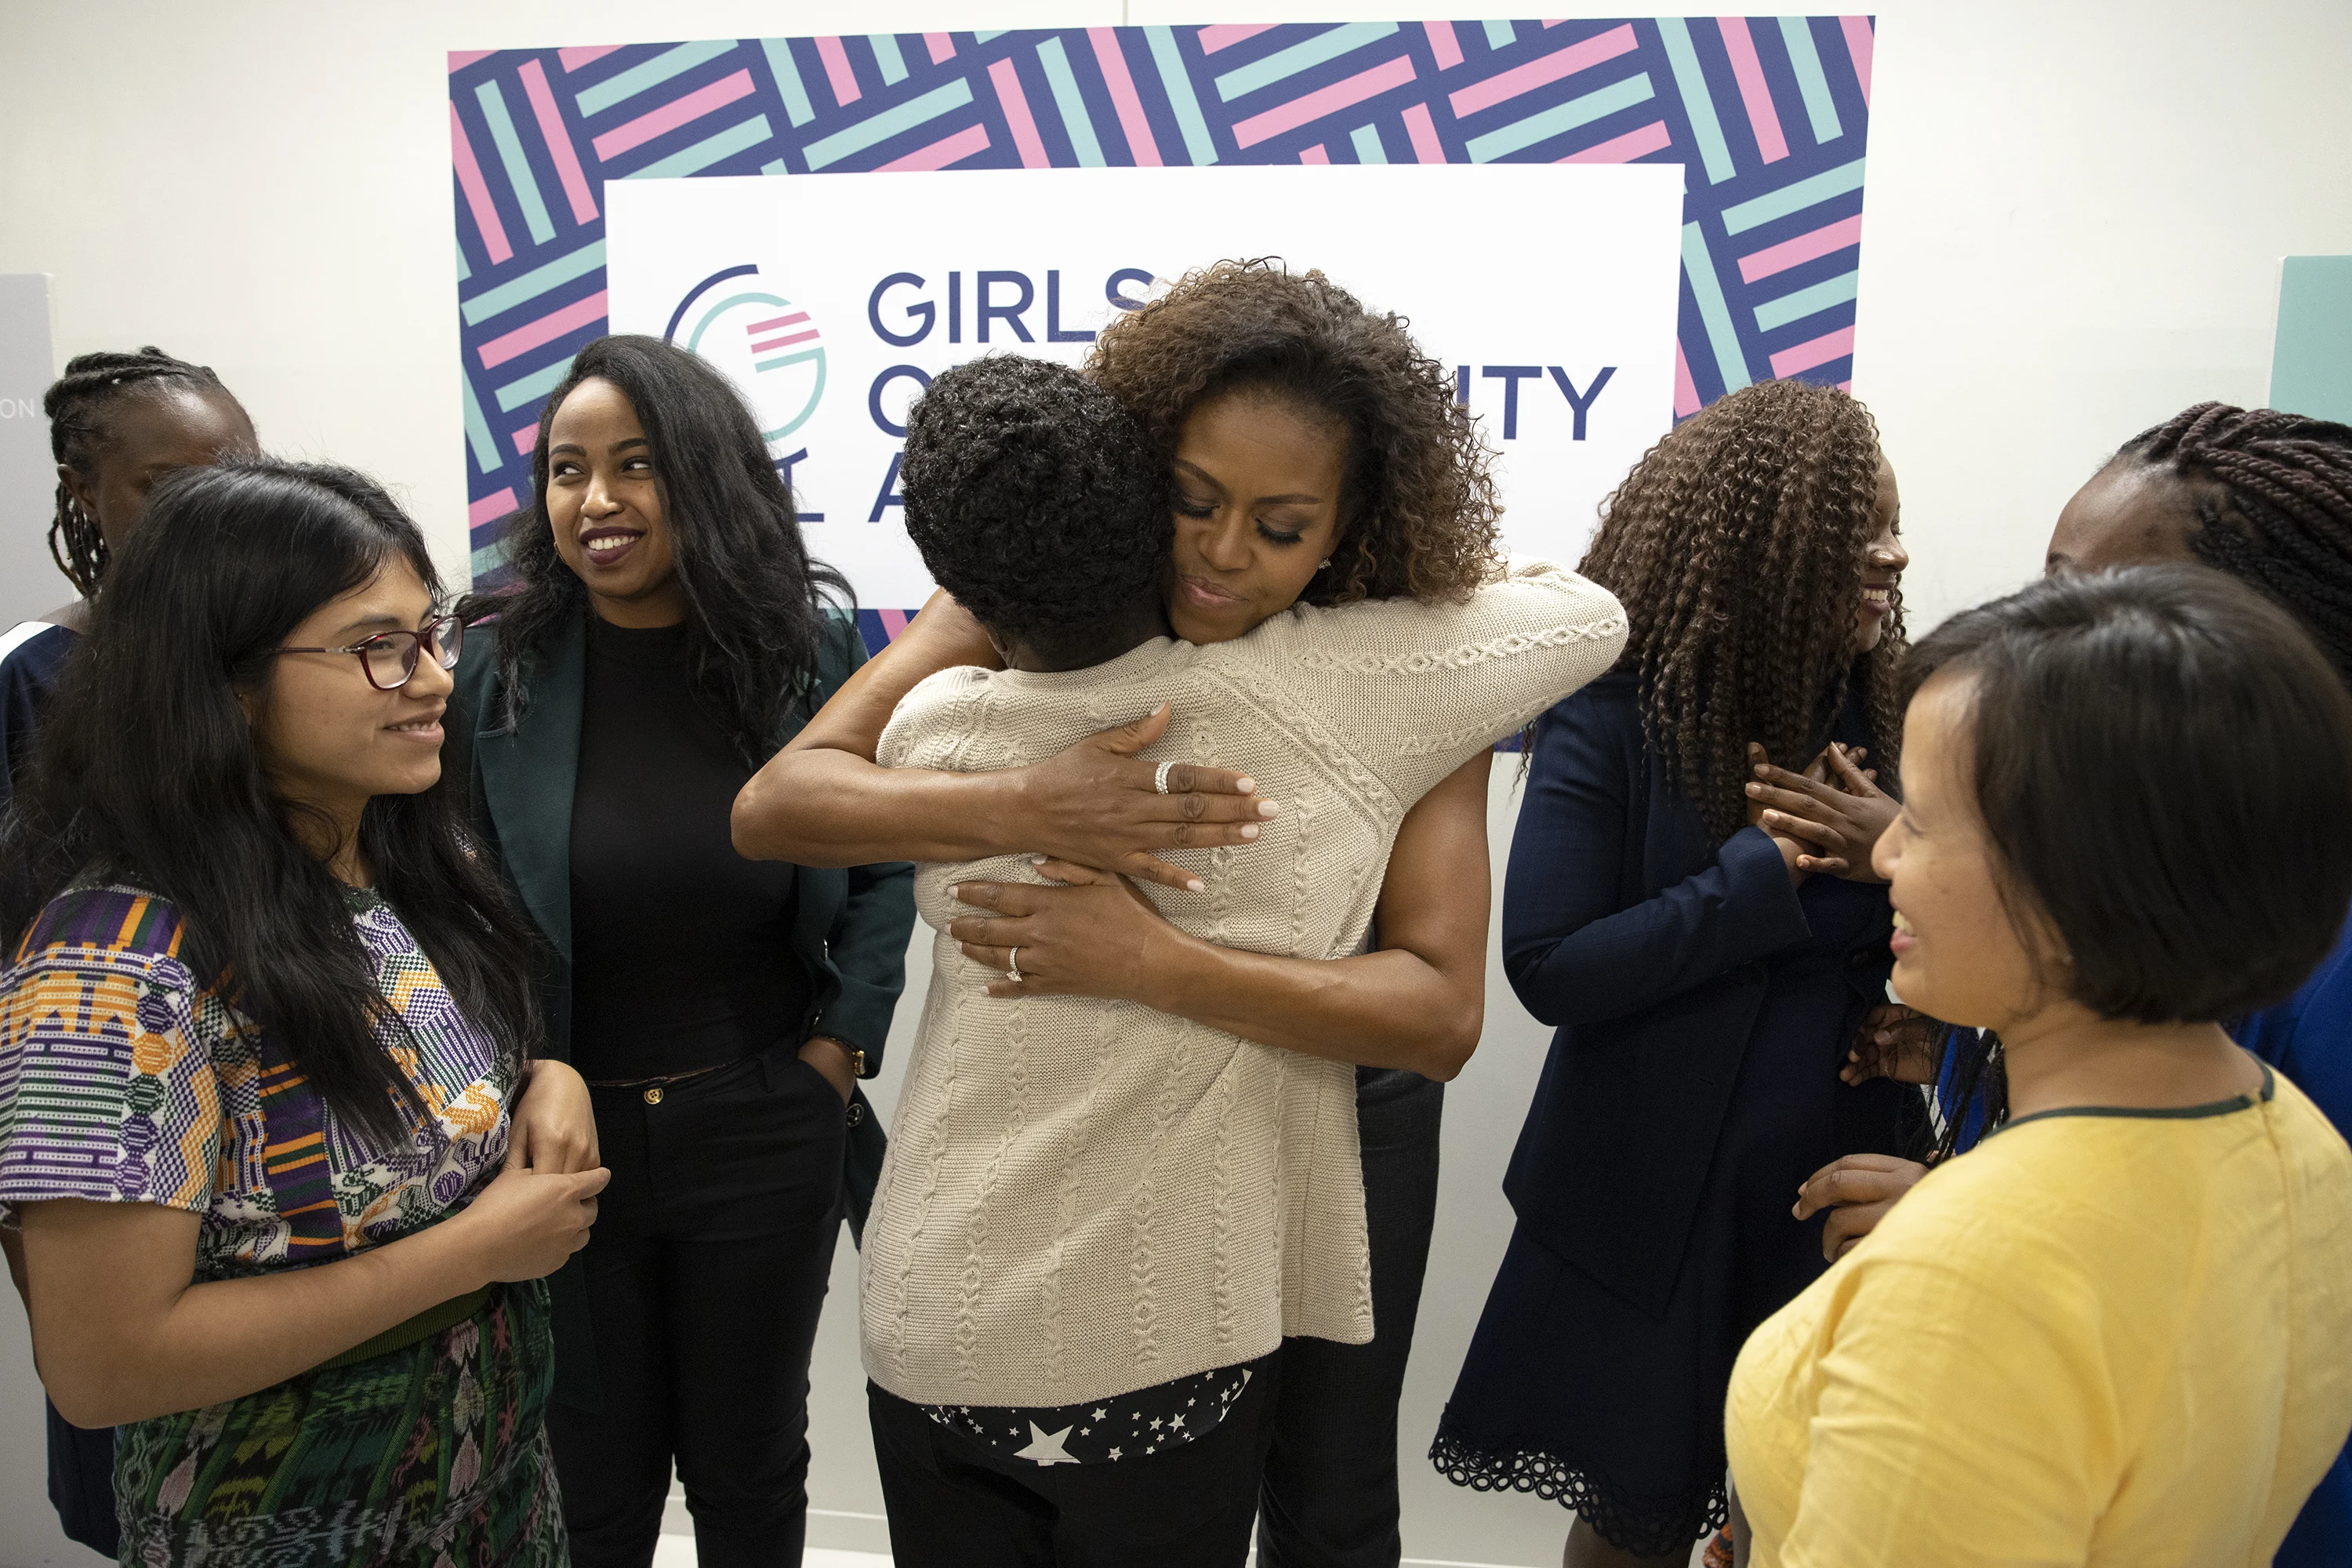 There are three women on the right side of the image and three women on the left side of the image. In the center of the image, Michelle Obama is hugging a woman and facing the camera. Michelle Obama has curly hair and is wearing several rings. The woman she is hugging is facing opposite the camera – we cannot see her face – she has short curly hair and is wearing a beige sweater and black pants. In the background, several women with a range of light to deep skin tones and ages speak to one another. On the wall of the room is a poster that reads, “Girls Opportunity Alliance.” The poster has a border with short perpendicular lines in pink and light blue with a dark blue background. 